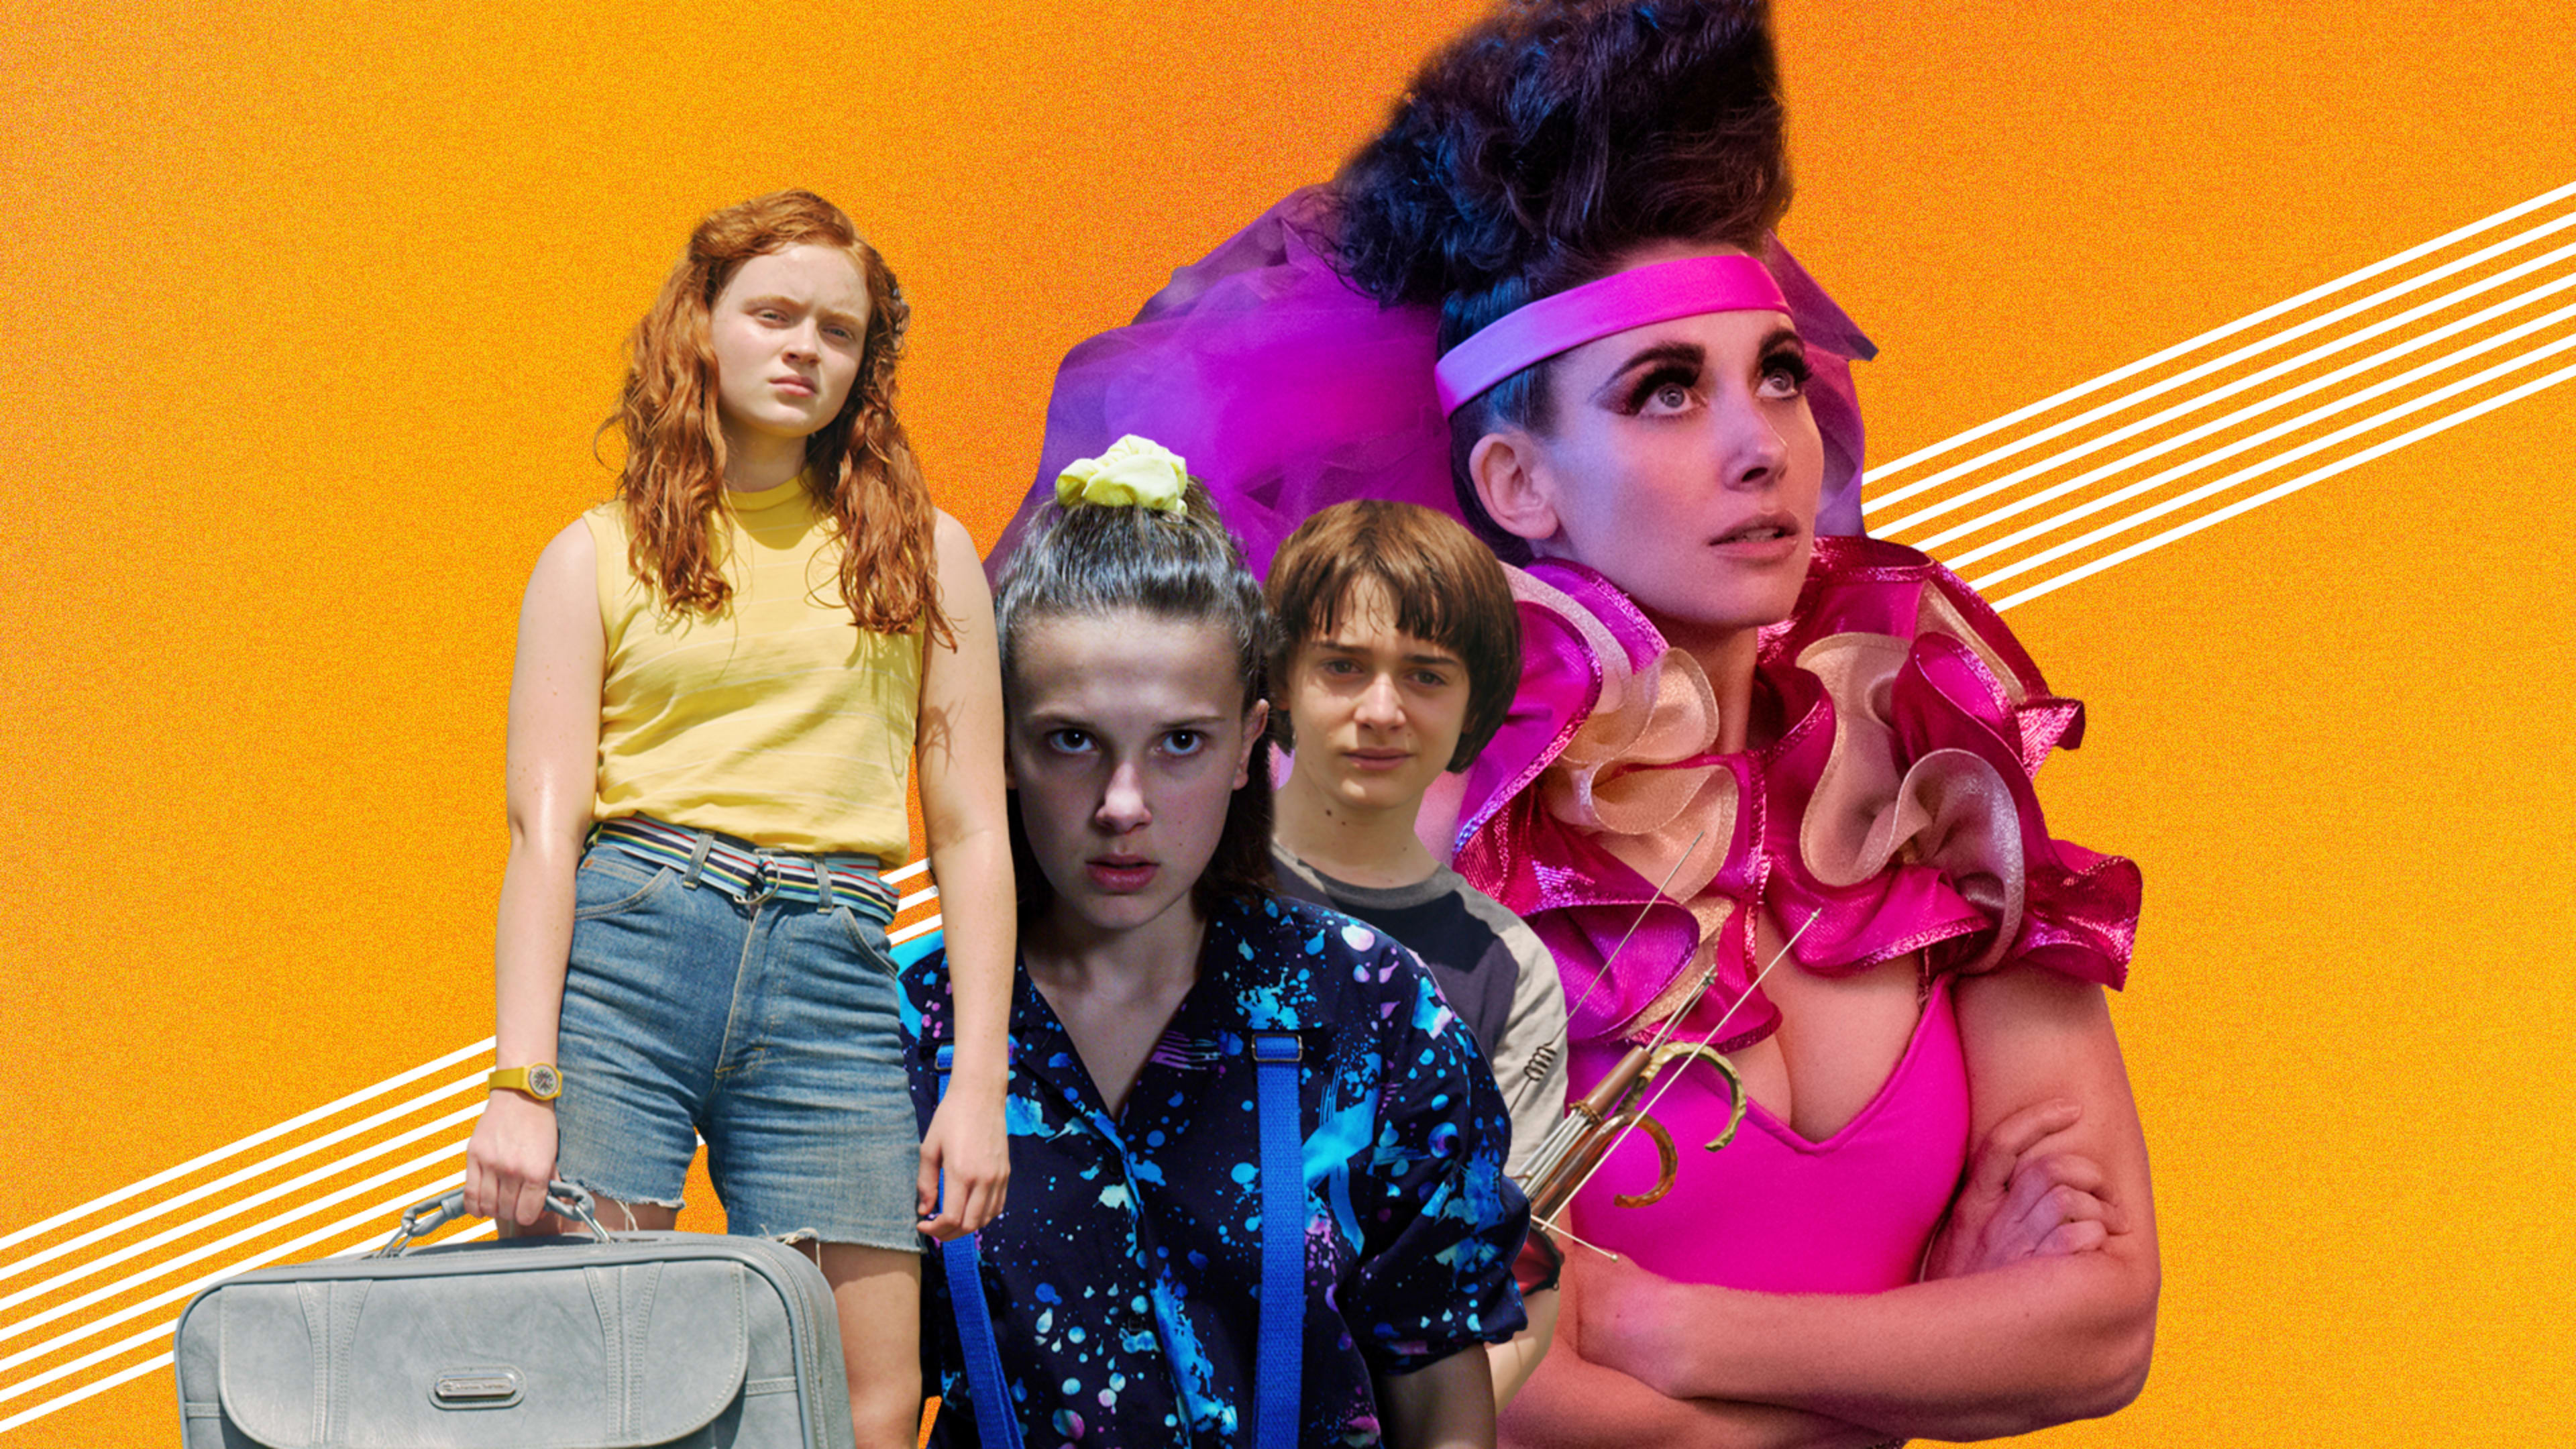 Halloween costume ideas from the designers of Glow and Stranger Things